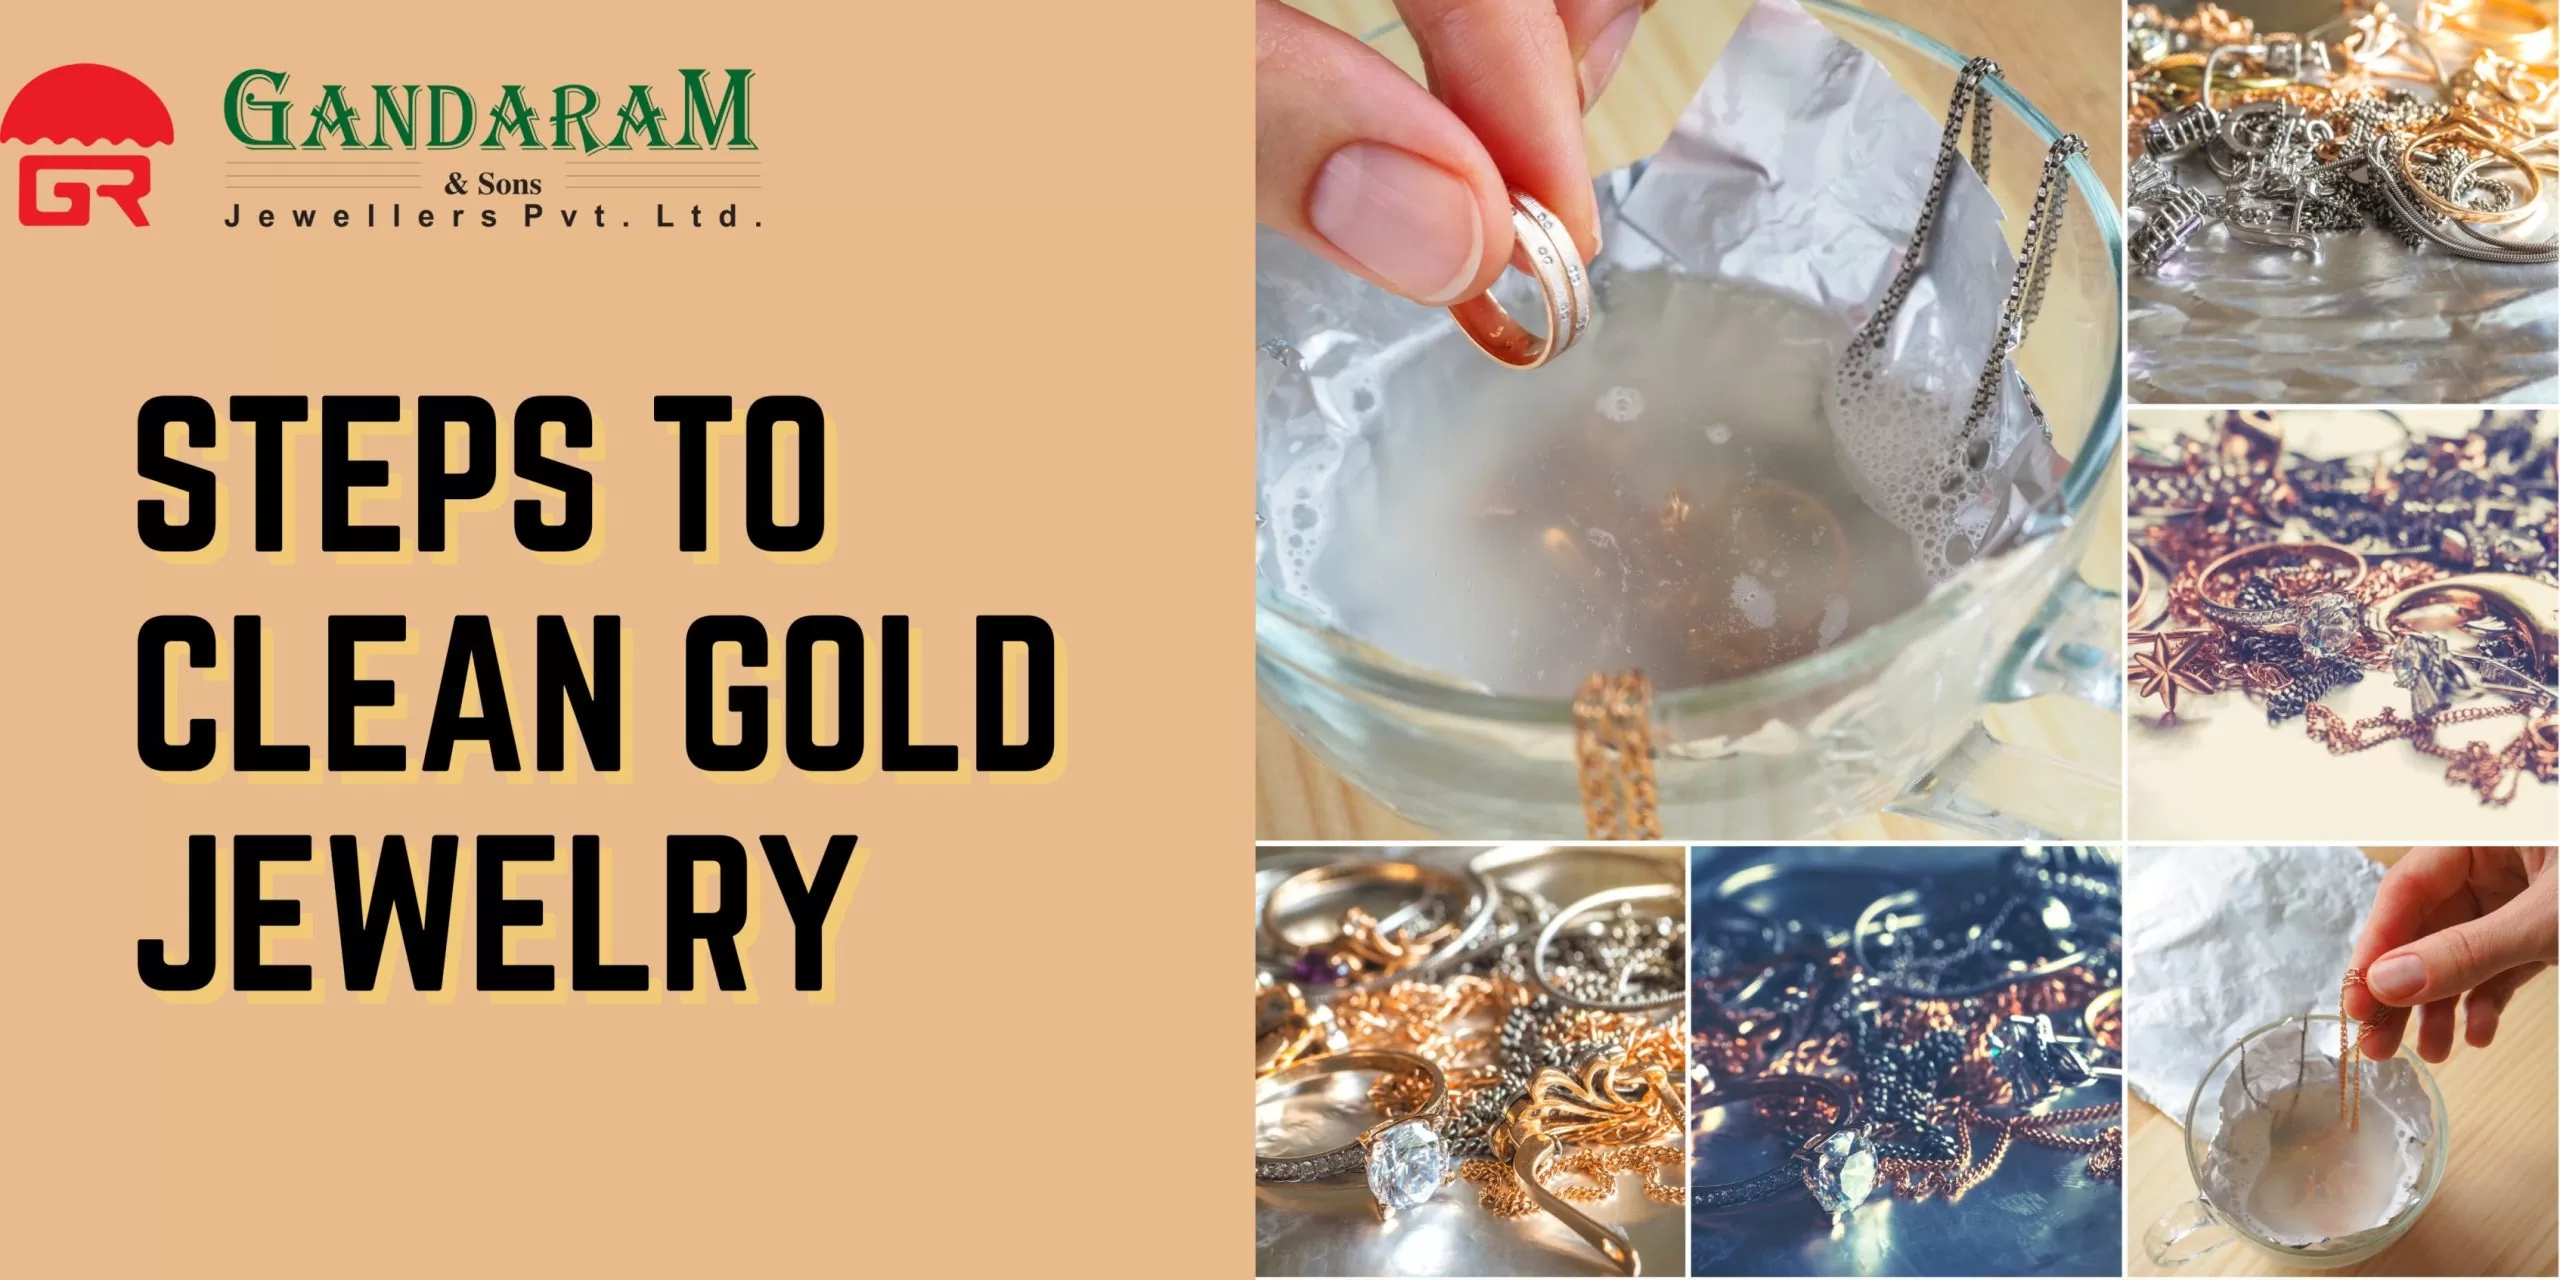 how to clean gold jewelry